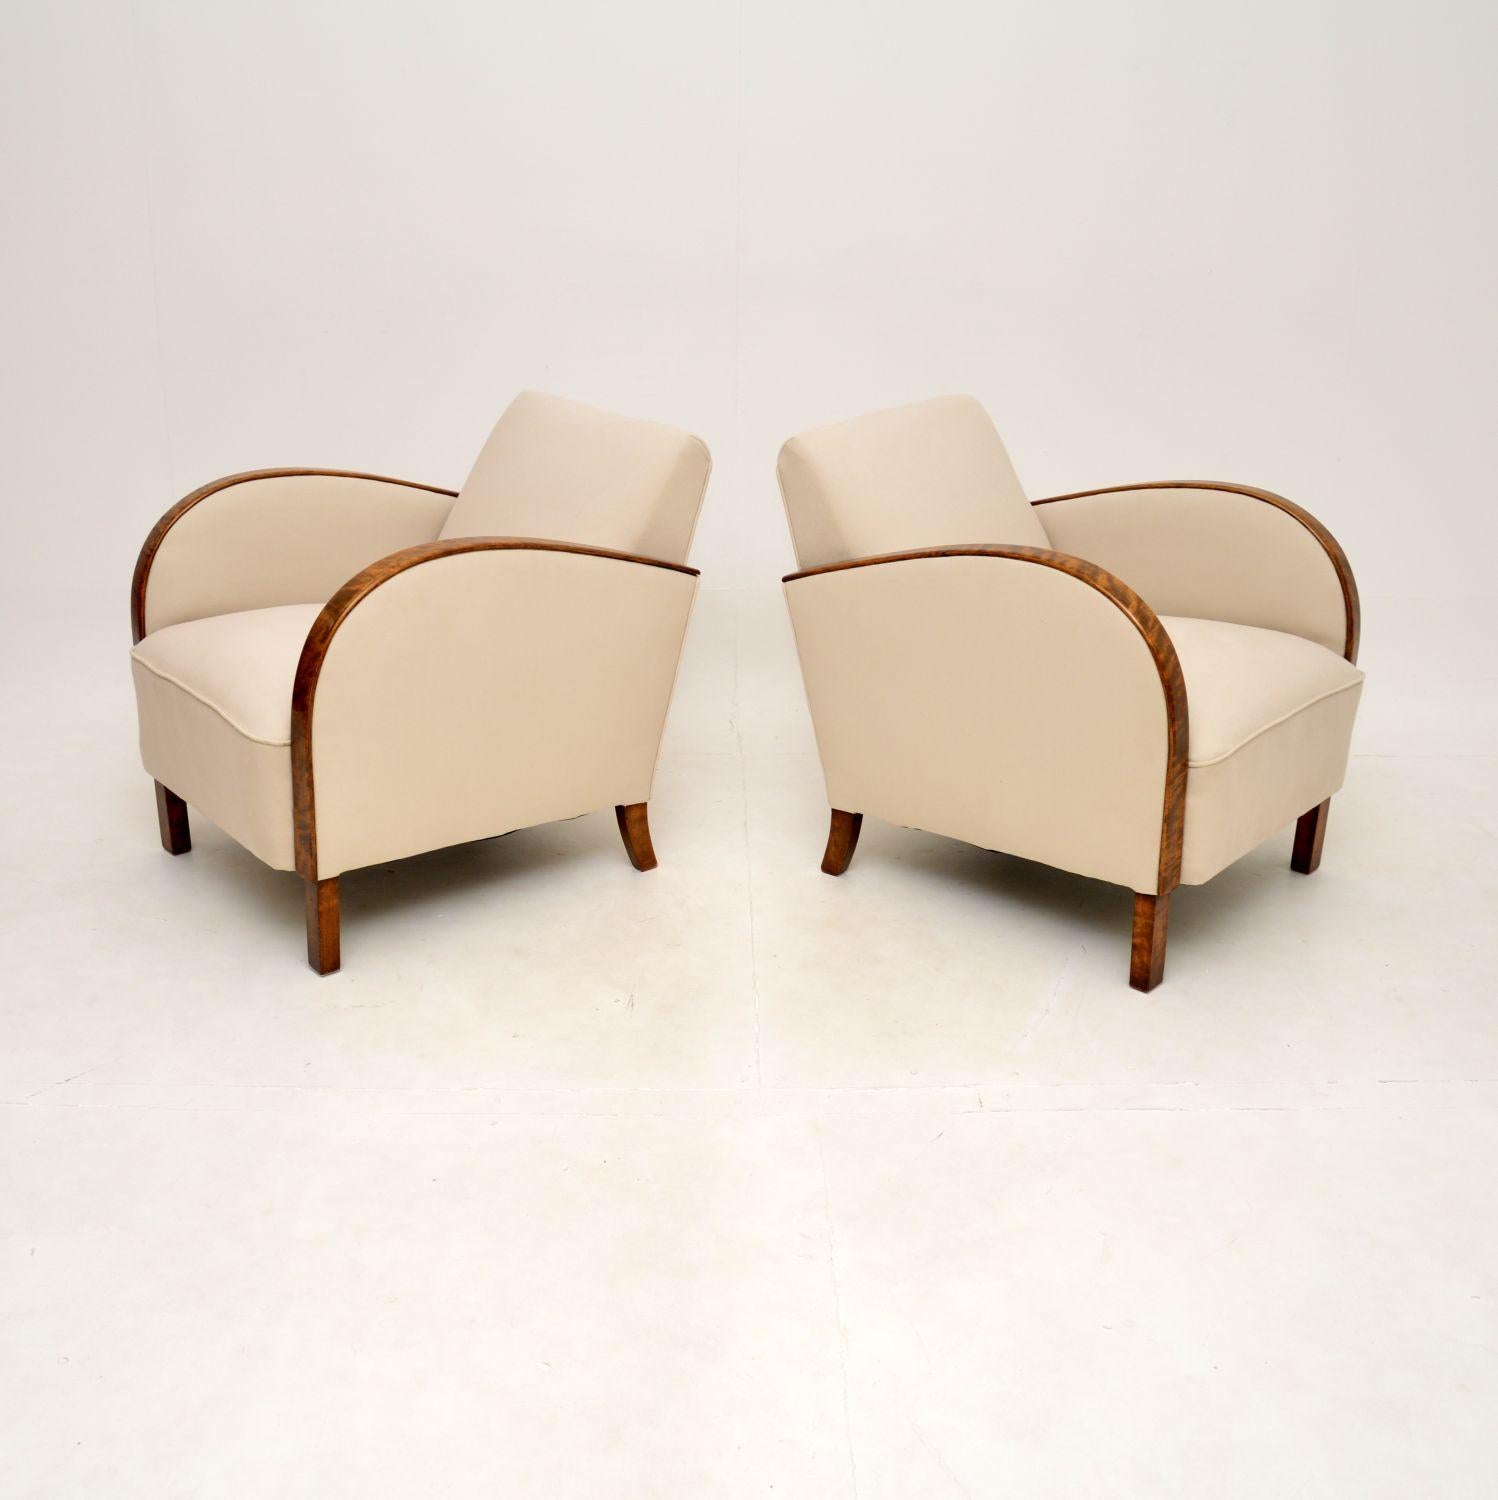 A stylish and very well made pair of Art Deco armchairs in satin birch. They were recently imported from Sweden, they date from the 1920-30’s.

The quality is excellent, they are well sprung and very comfortable. The sweeping satin birch arms curve